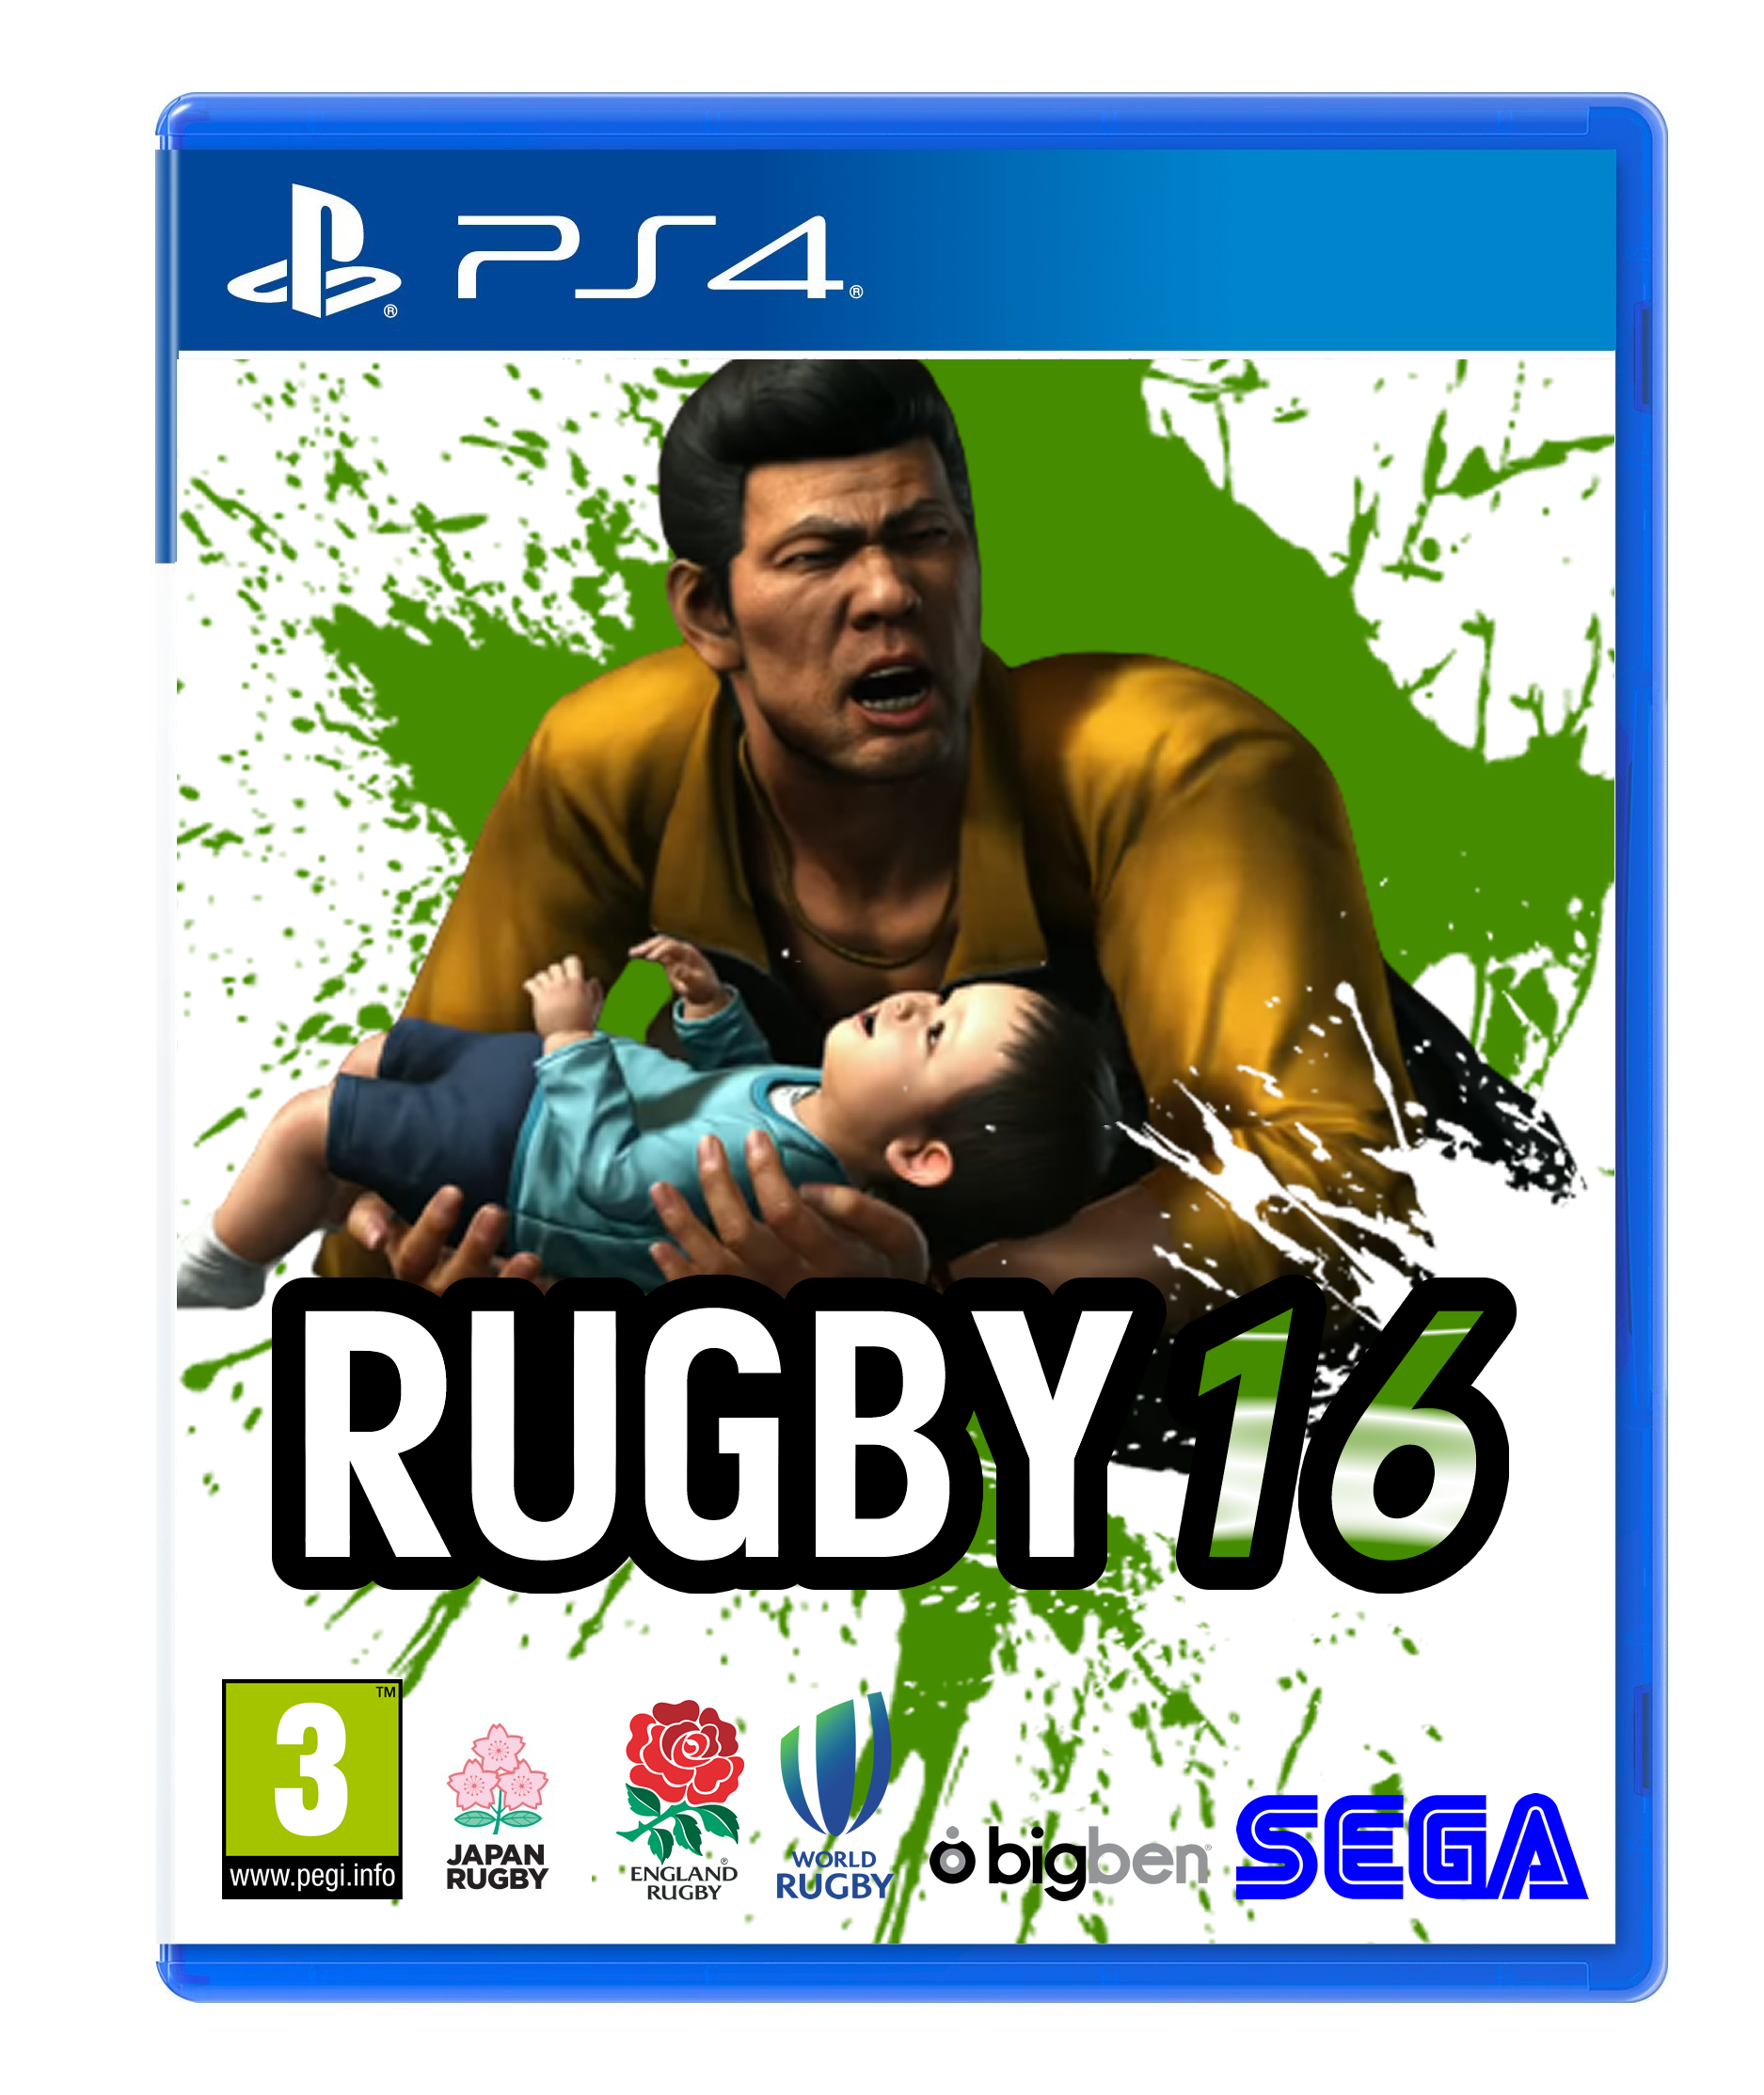 Rugby 16 box cover